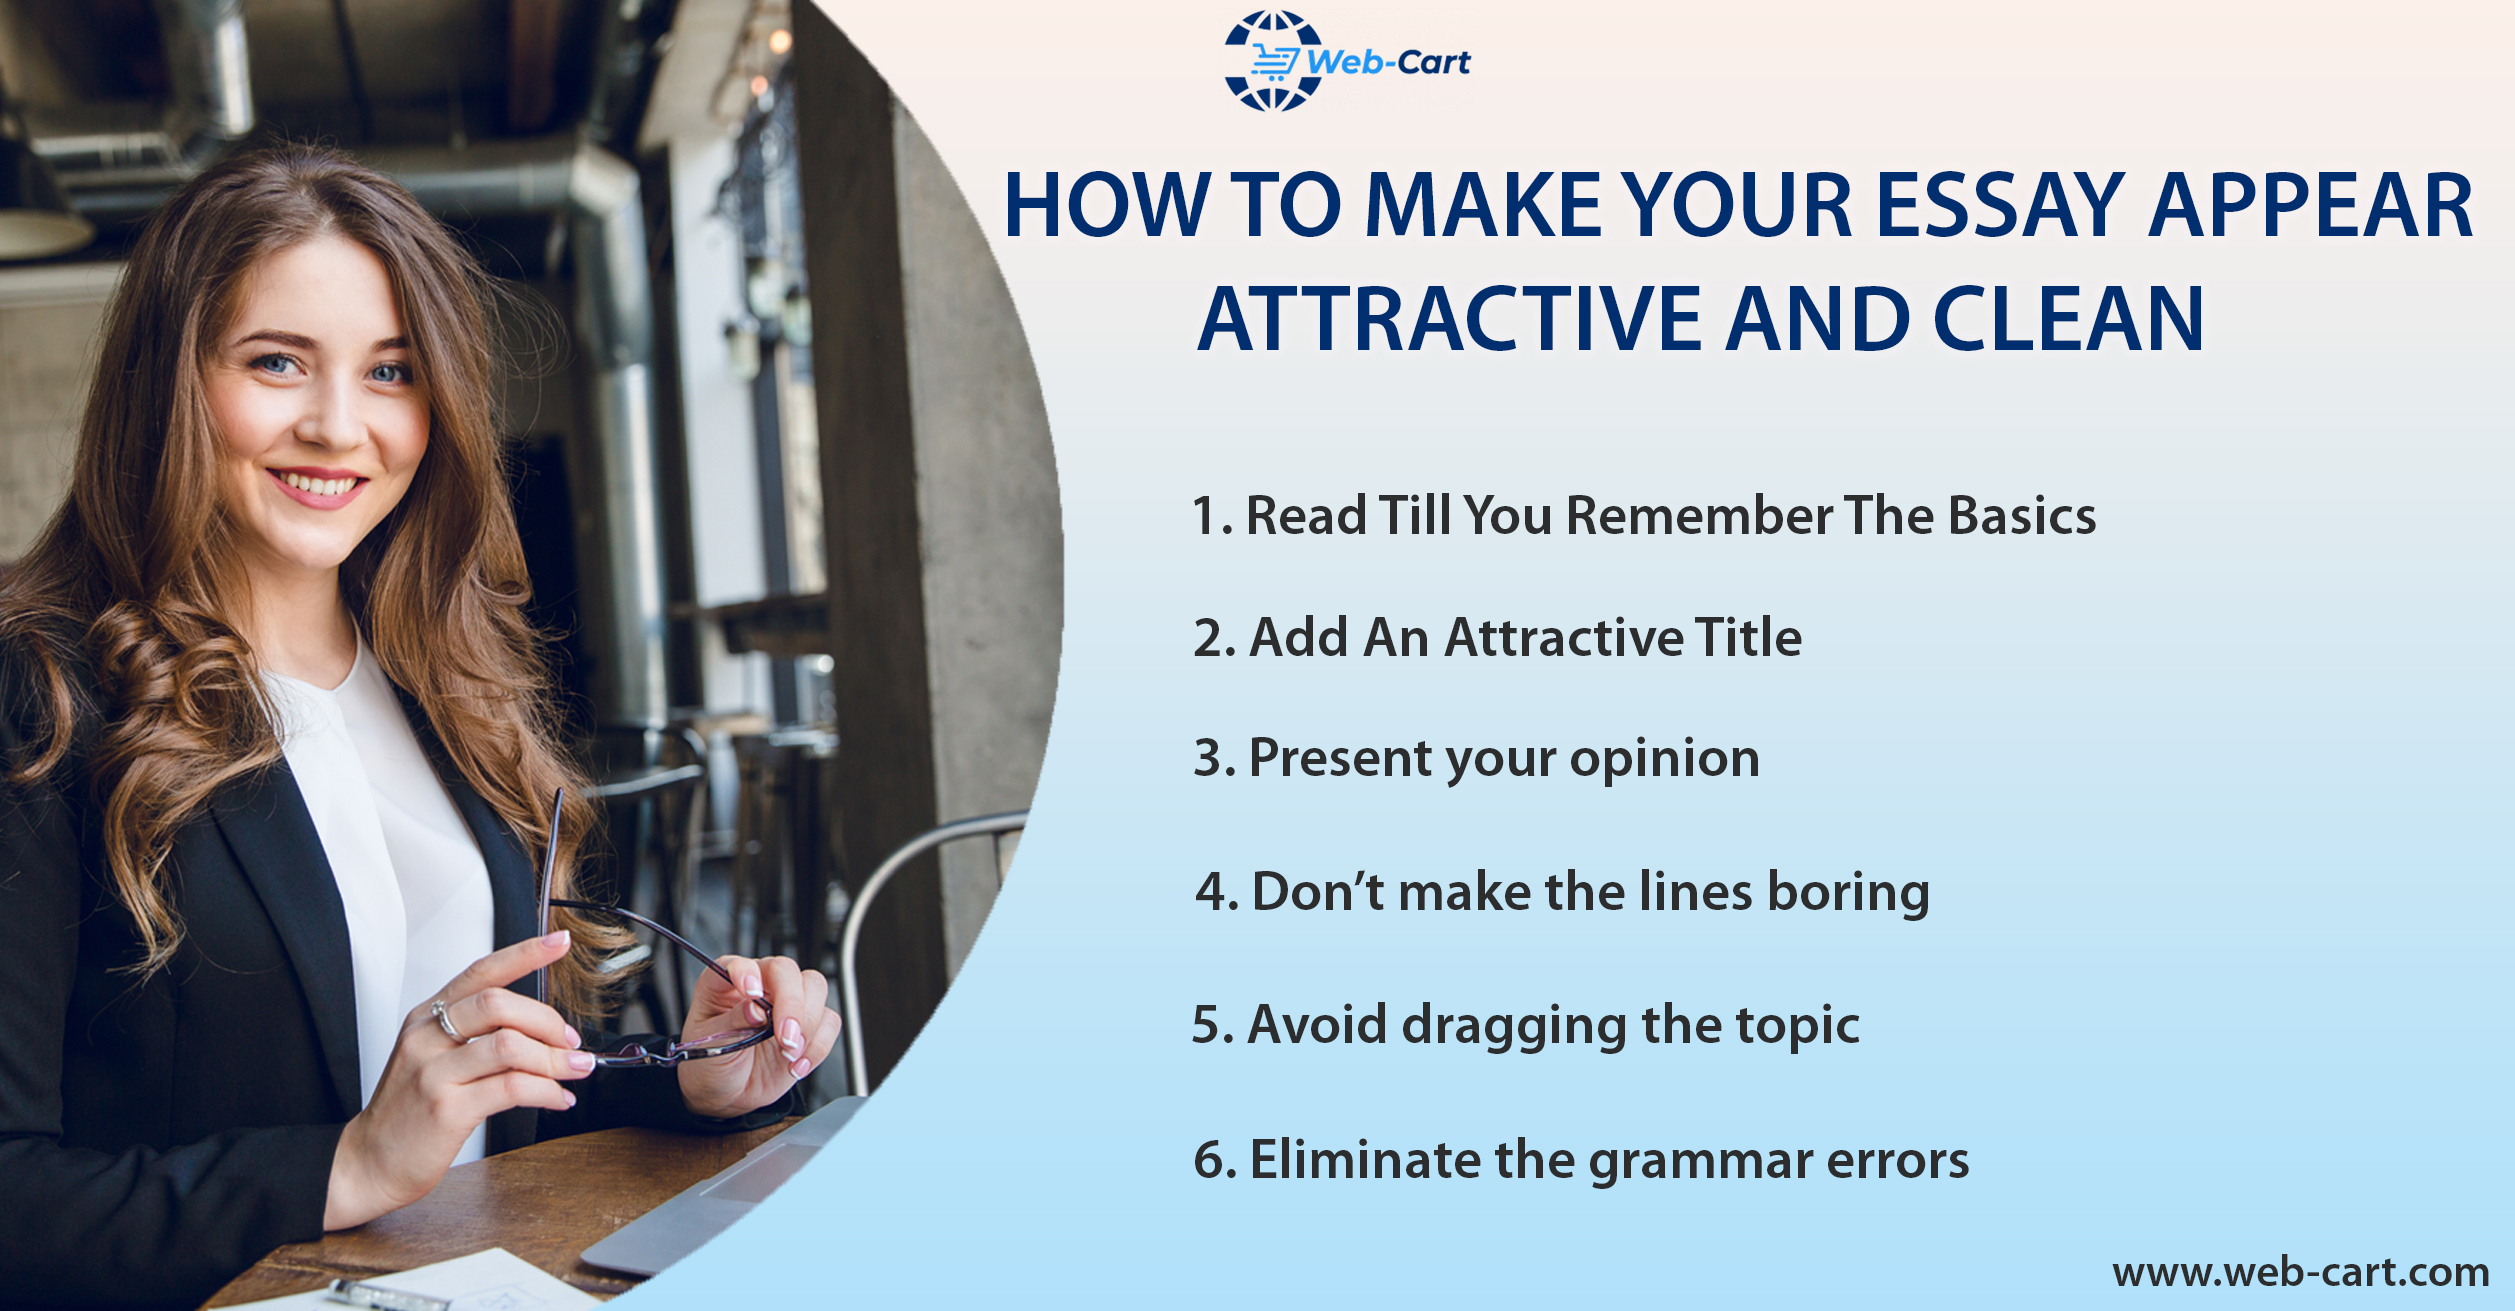 How to Make Your Essay Appear Attractive and Clean